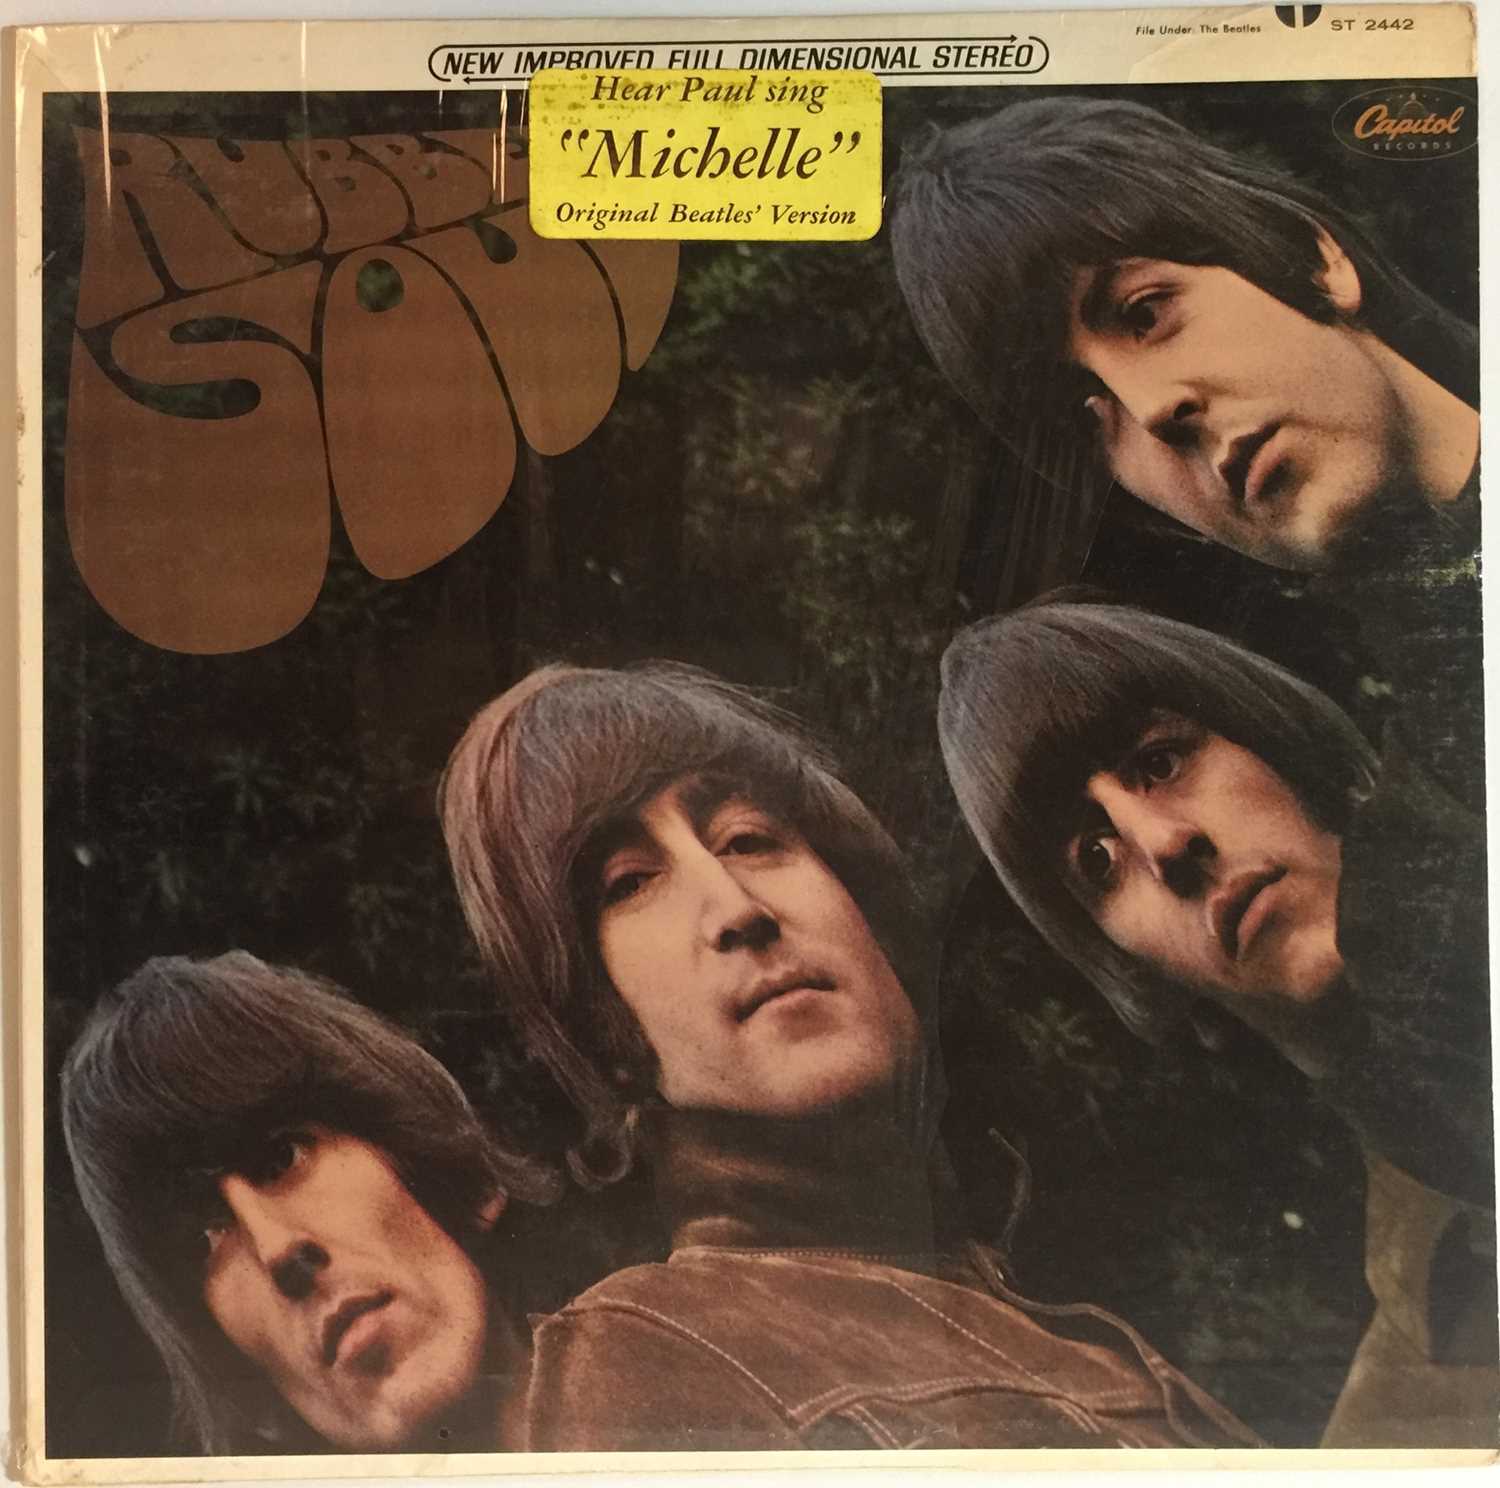 Lot 19 - THE BEATLES - RUBBER SOUL LP (US STEREO PRESSING - CAPITOL ST-2442 - WITH HYPE STICKER)